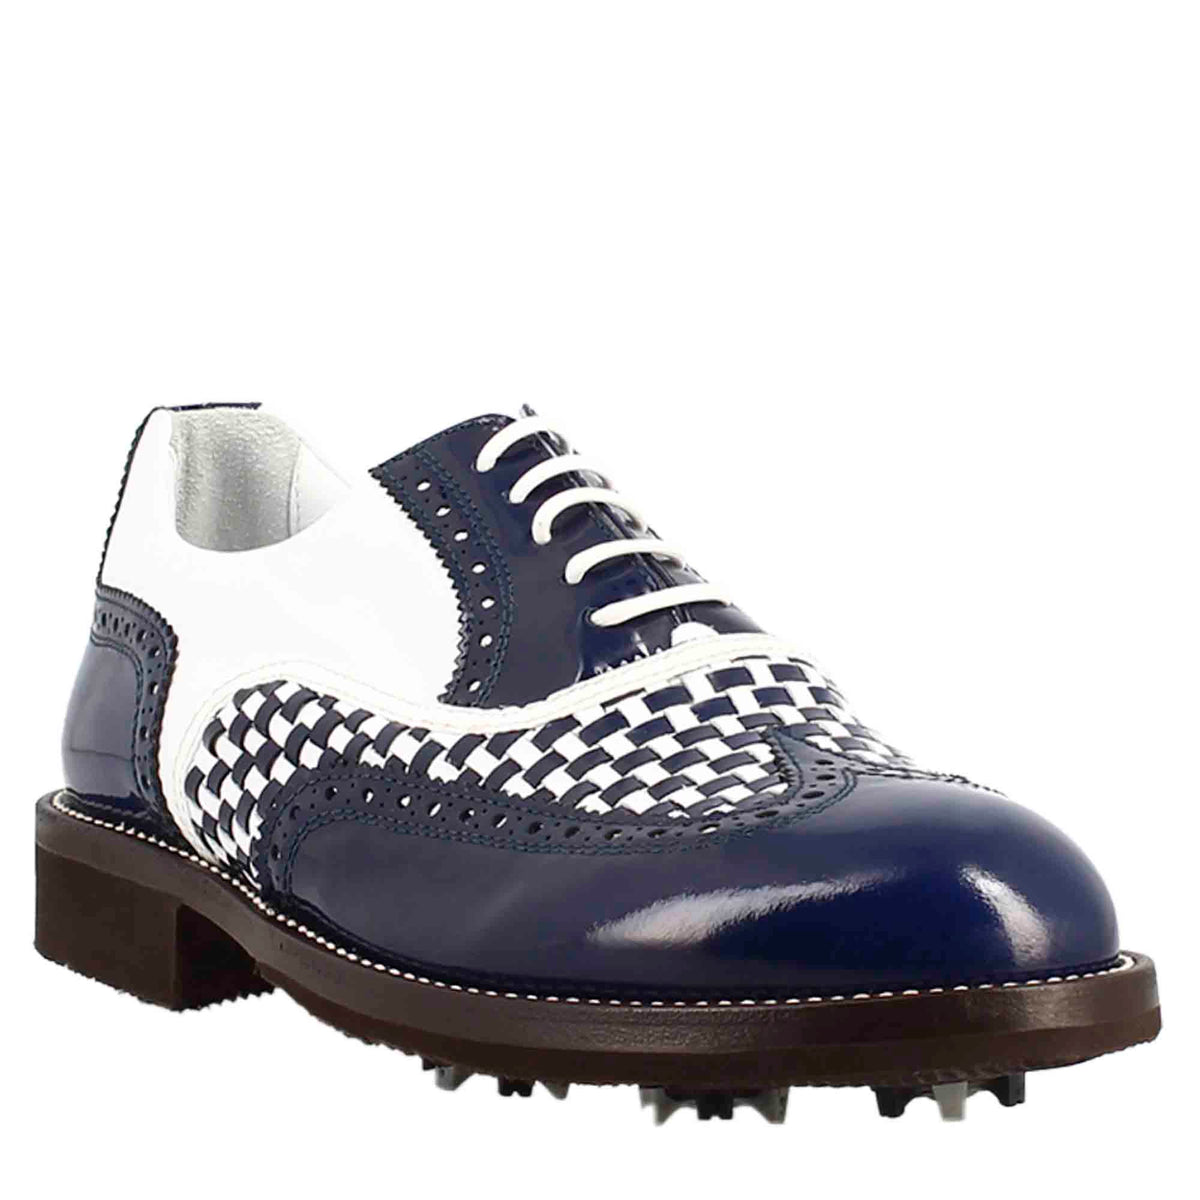 Women's blue and white leather handcrafted brogue details